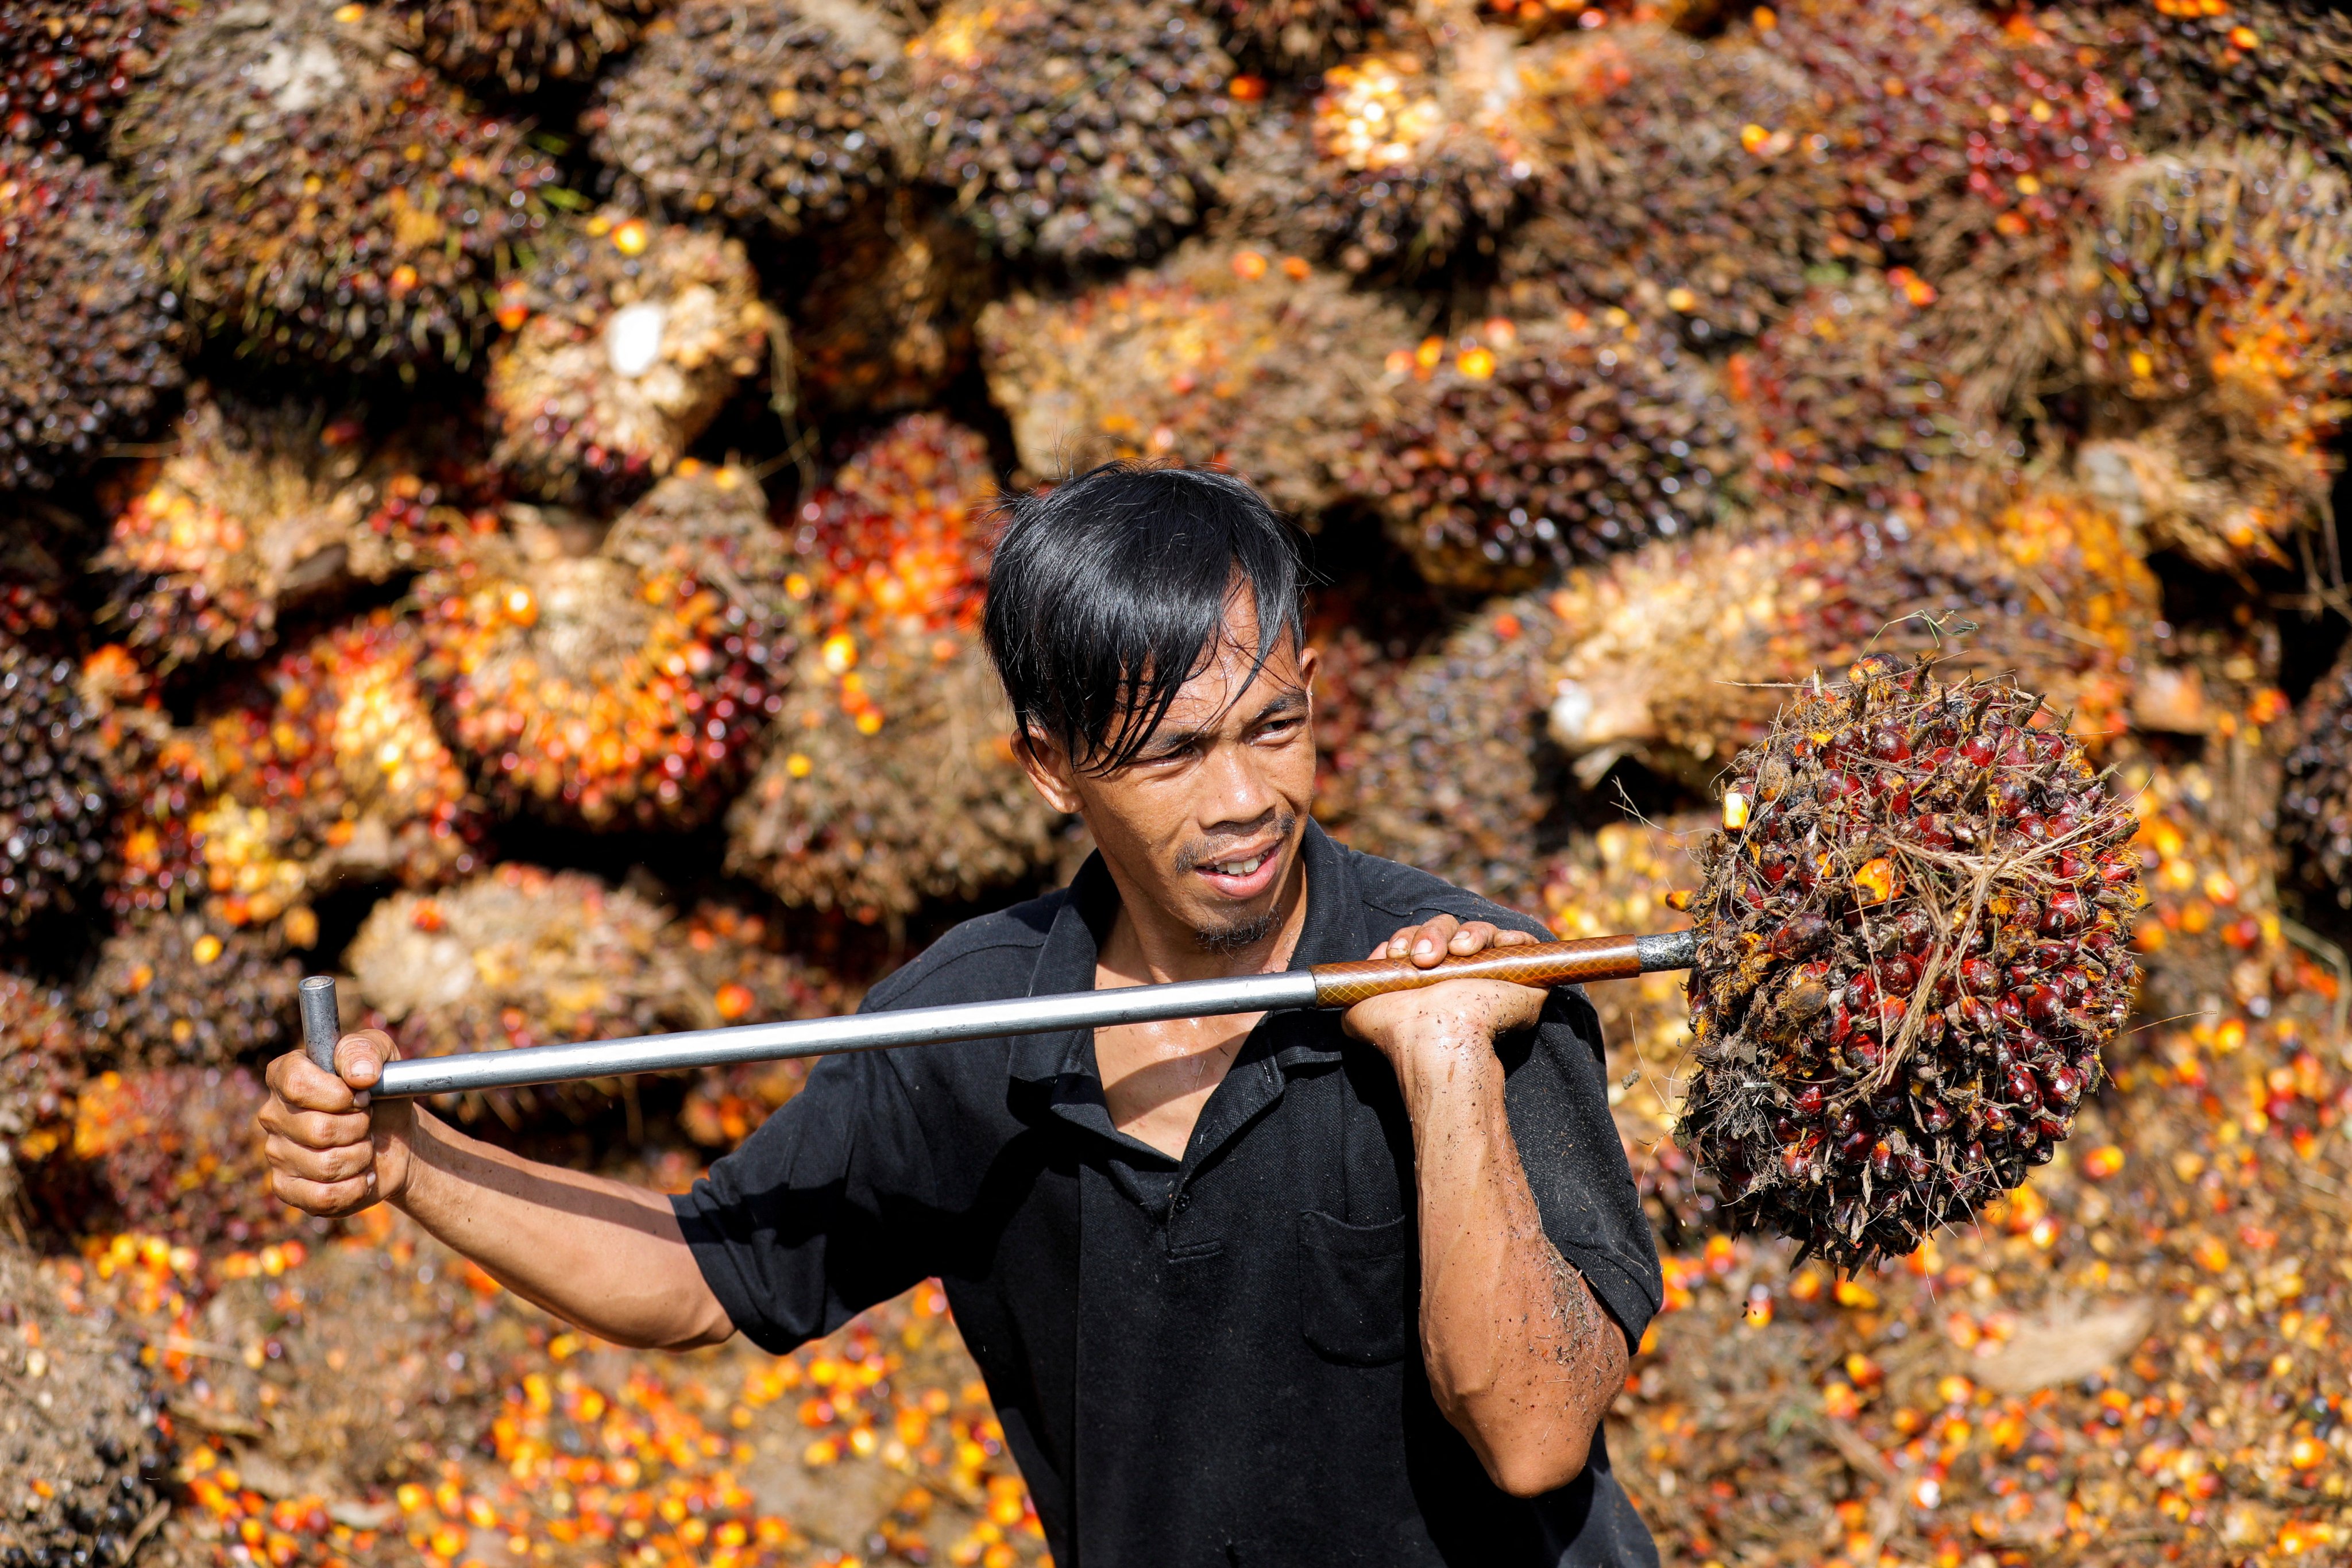 A worker loads palm oil fruit to be transported to factories in Pekanbaru, Riau province, Indonesia, on April 27. Indonesia, which supplies some 335,000 tonnes of crude palm oil to the EU every month, is already working on a carbon tax framework. Photo: Reuters